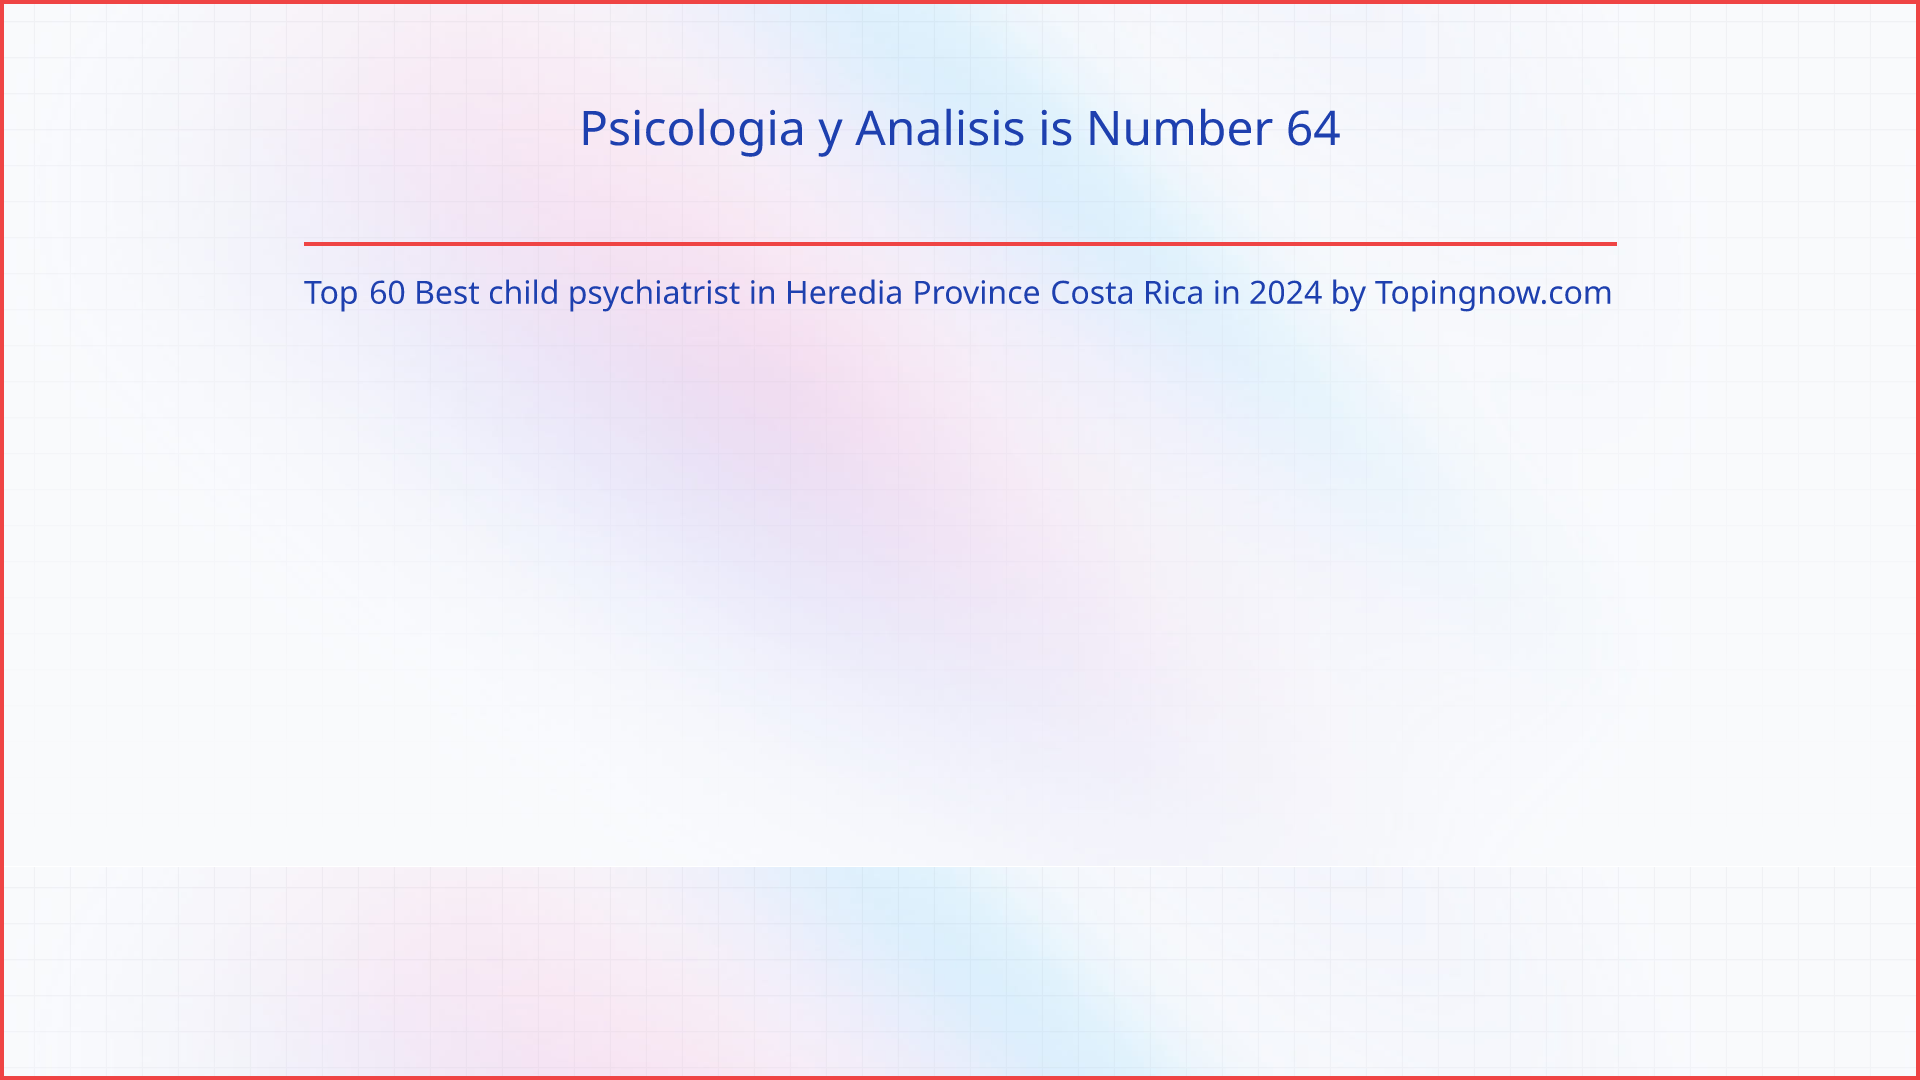 Psicologia y Analisis: Top 60 Best child psychiatrist in Heredia Province Costa Rica in 2024